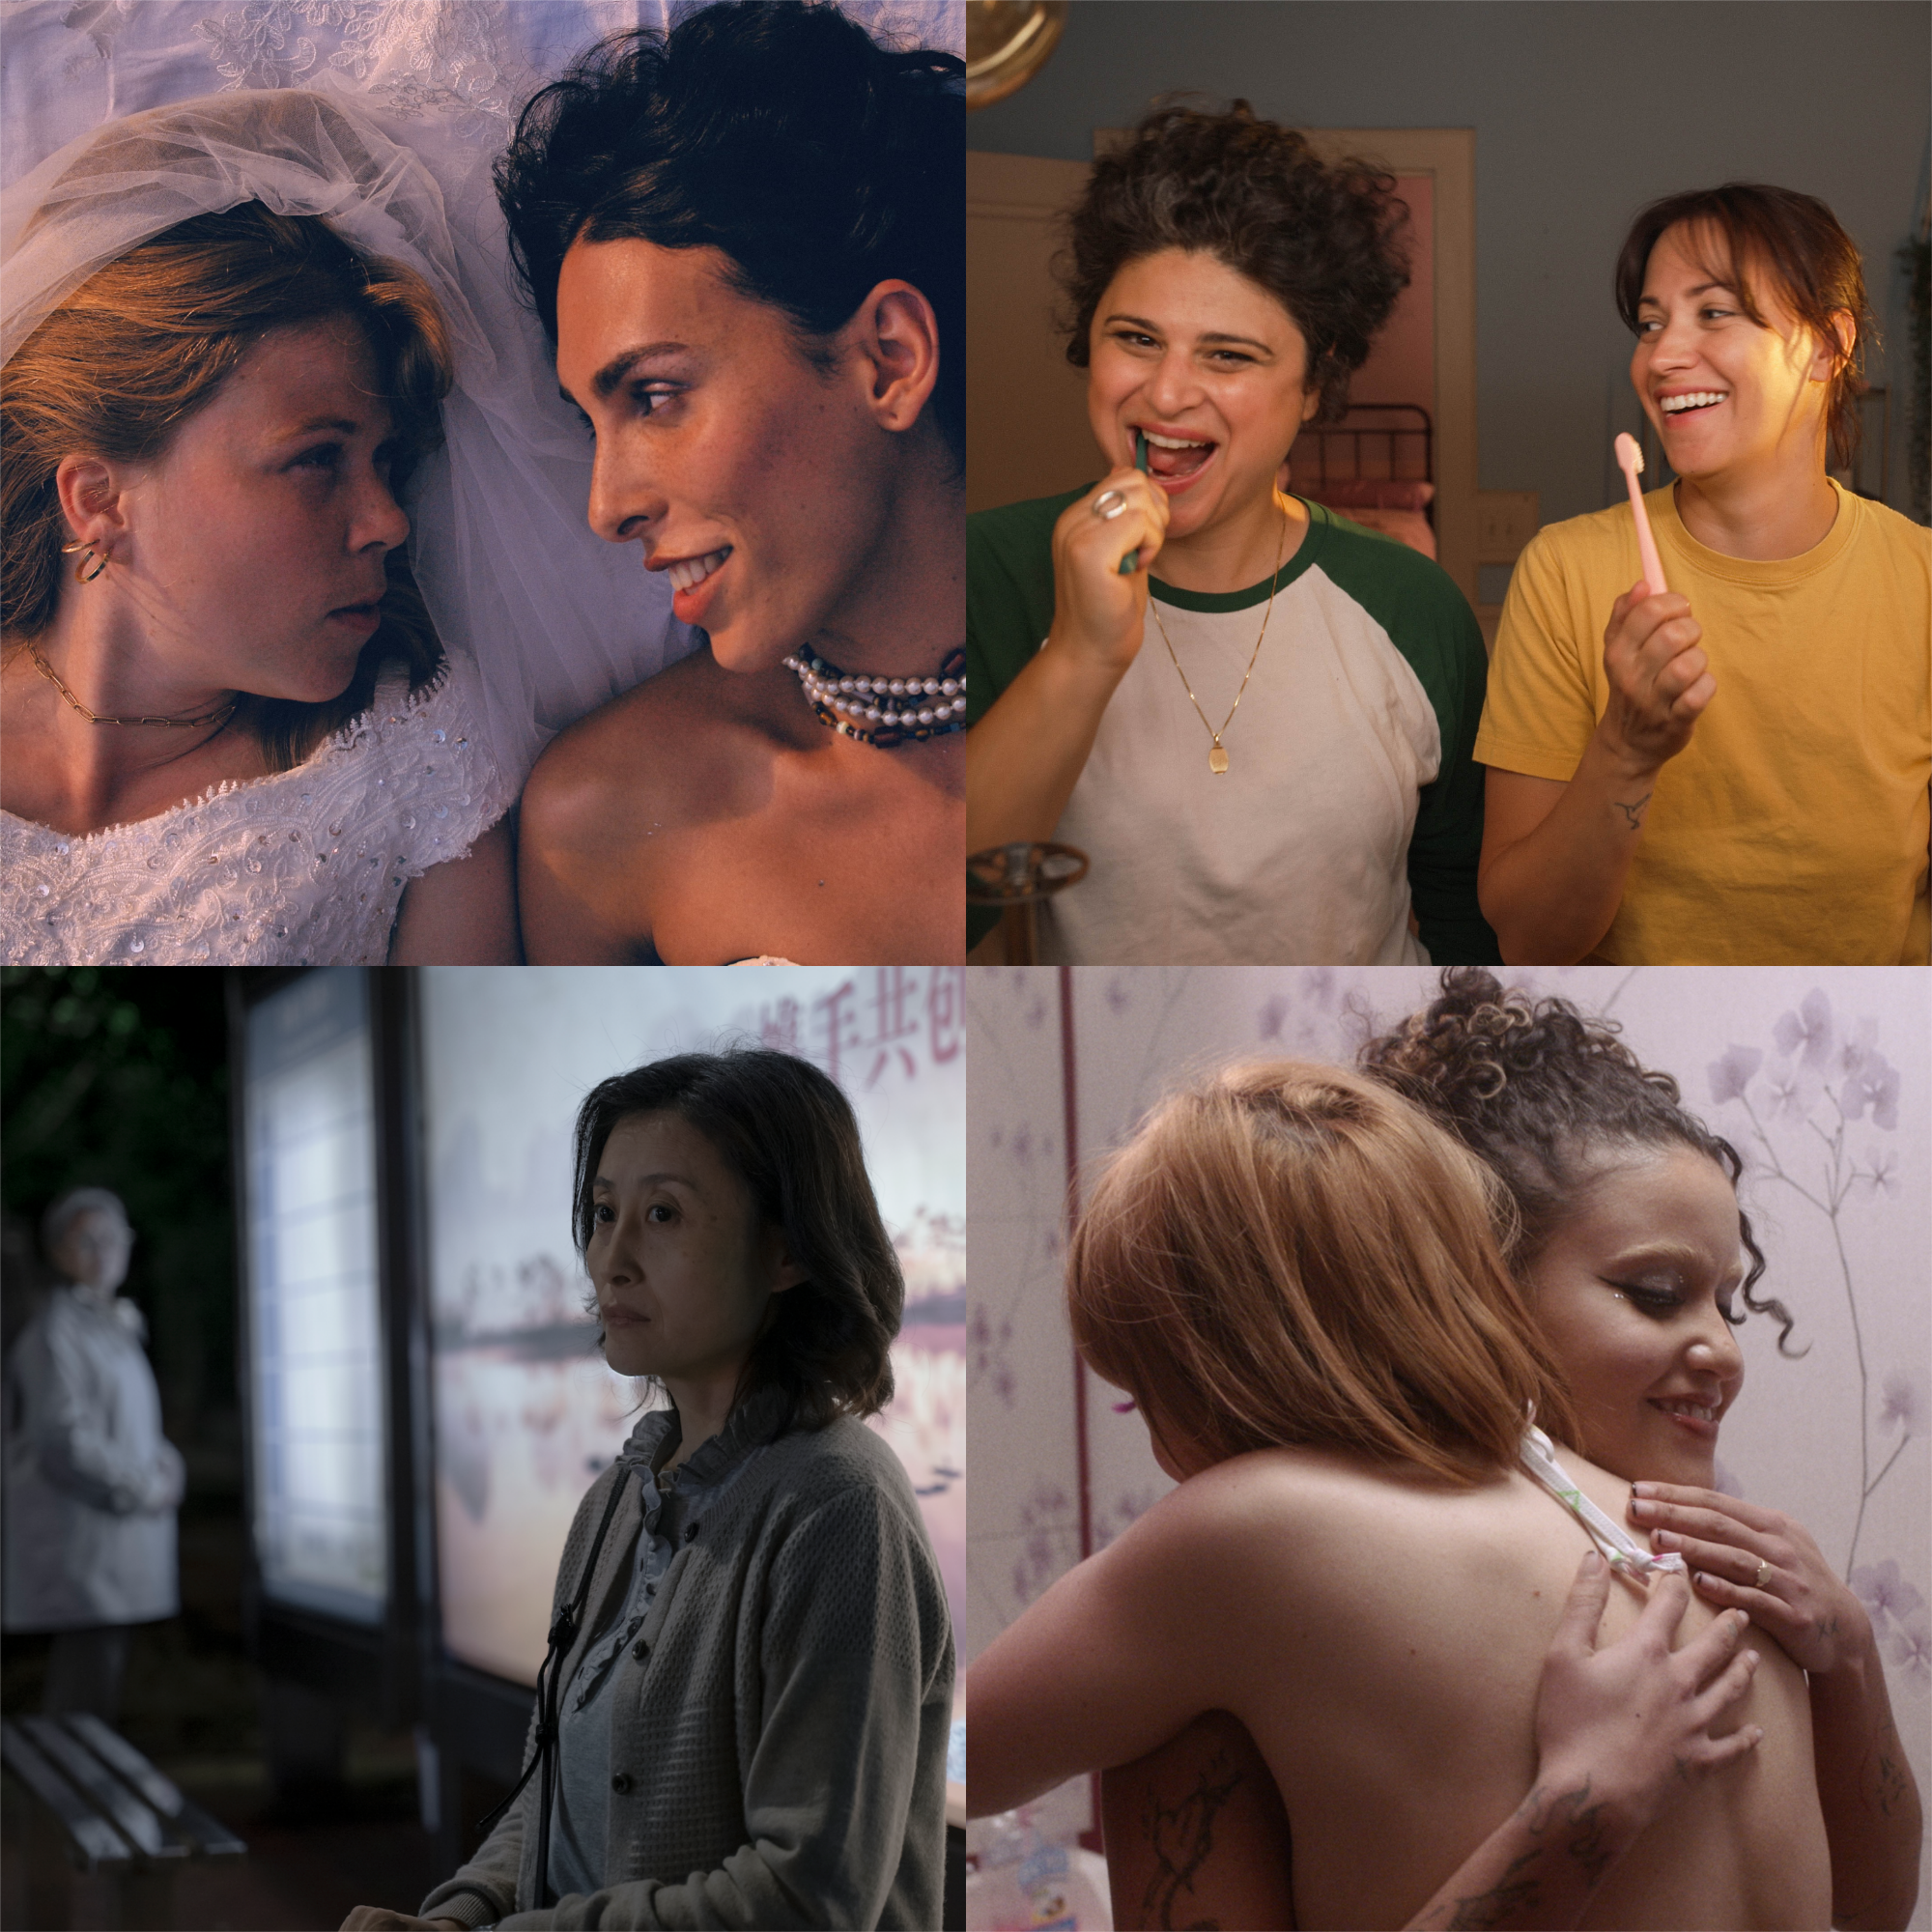 A collage of images: two women lying next to each other looking lovingly into each other's eyes, two women laughing while brushing their teeth, an older woman standing oblivious to another watching her longingly, and two women hugging.